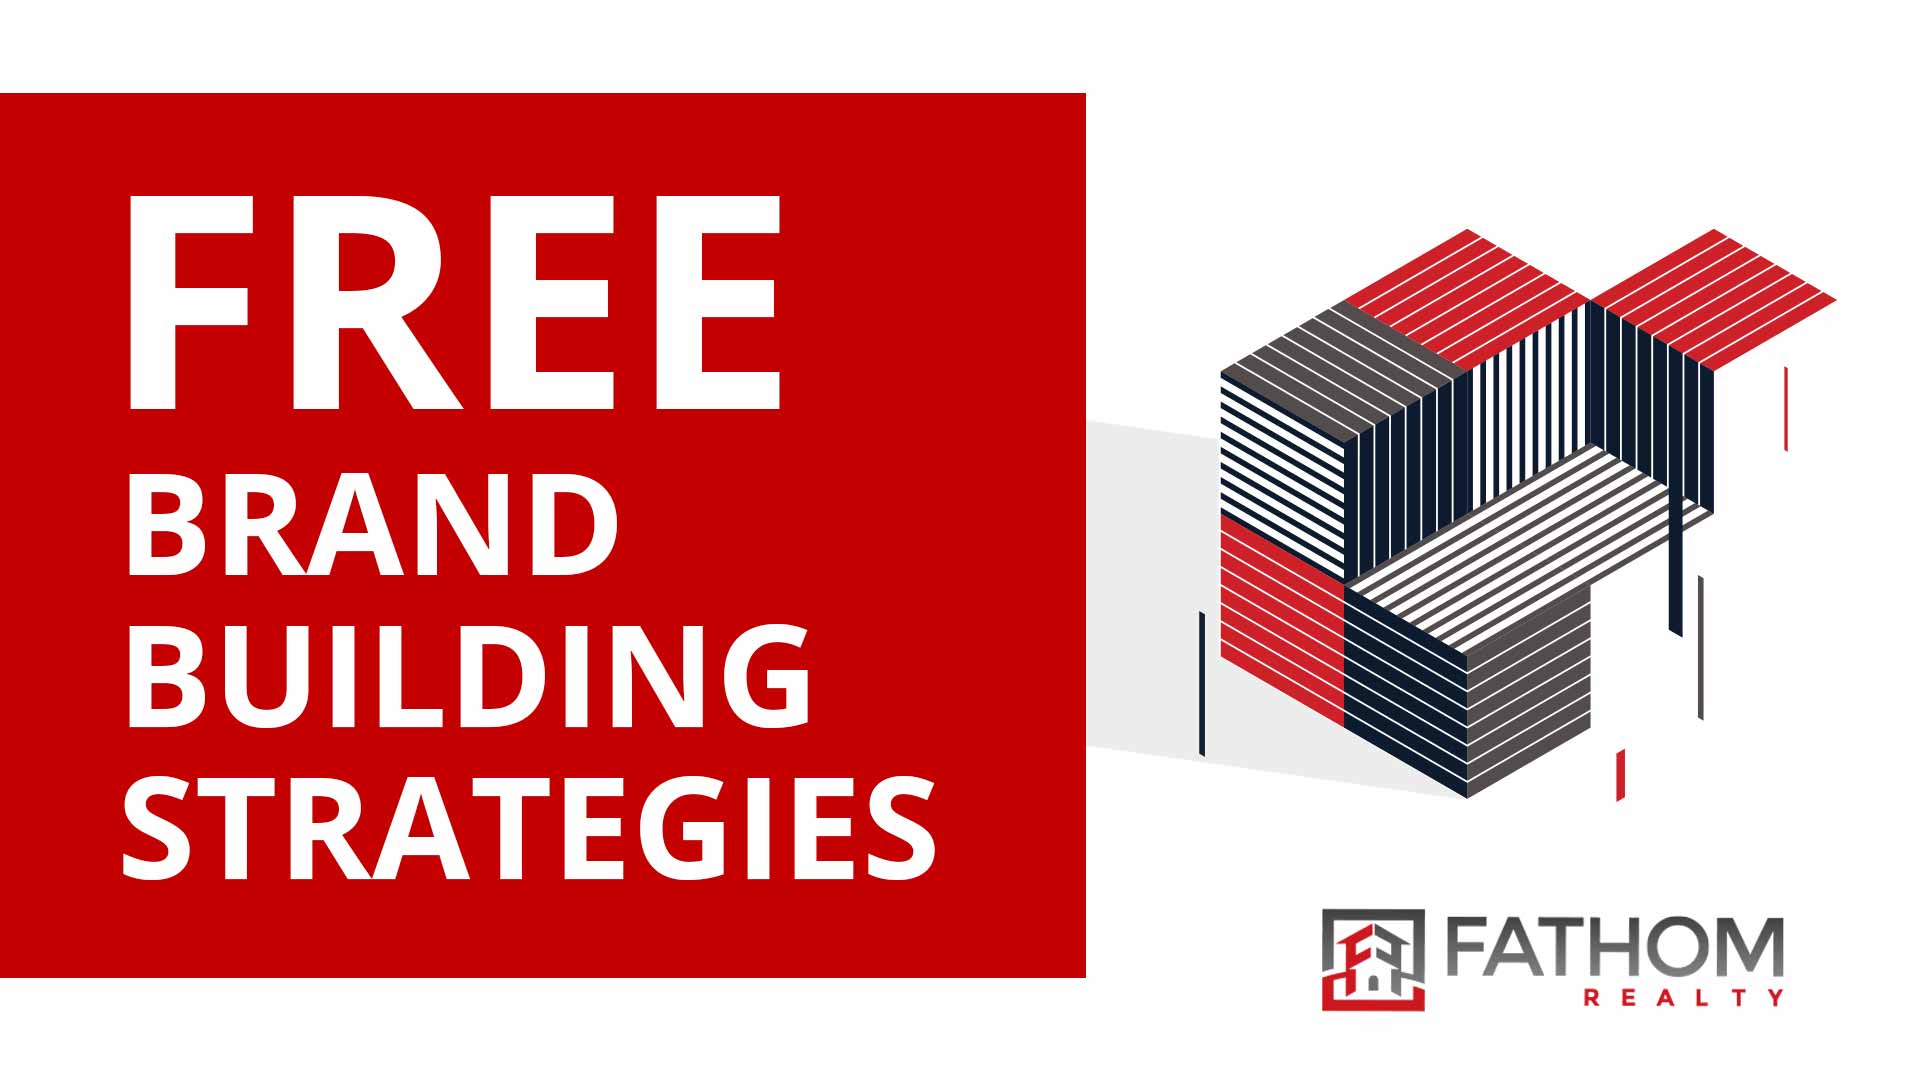 Featured image for “Free Brand Building Strategies”